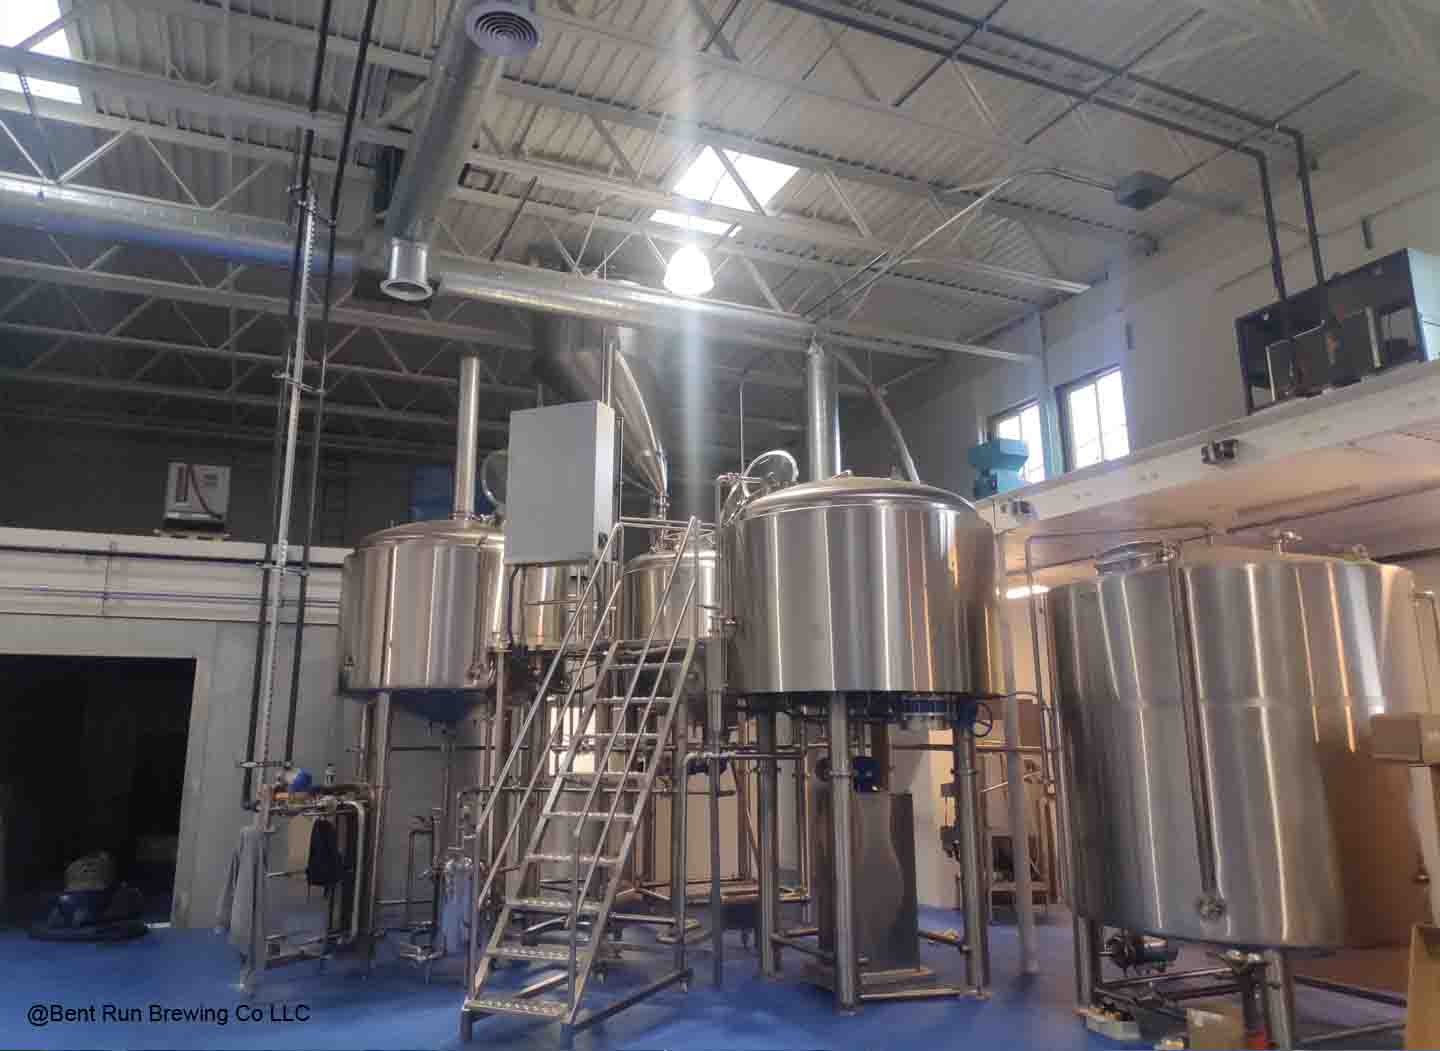 How to Open a Brewpub or Microbrewery